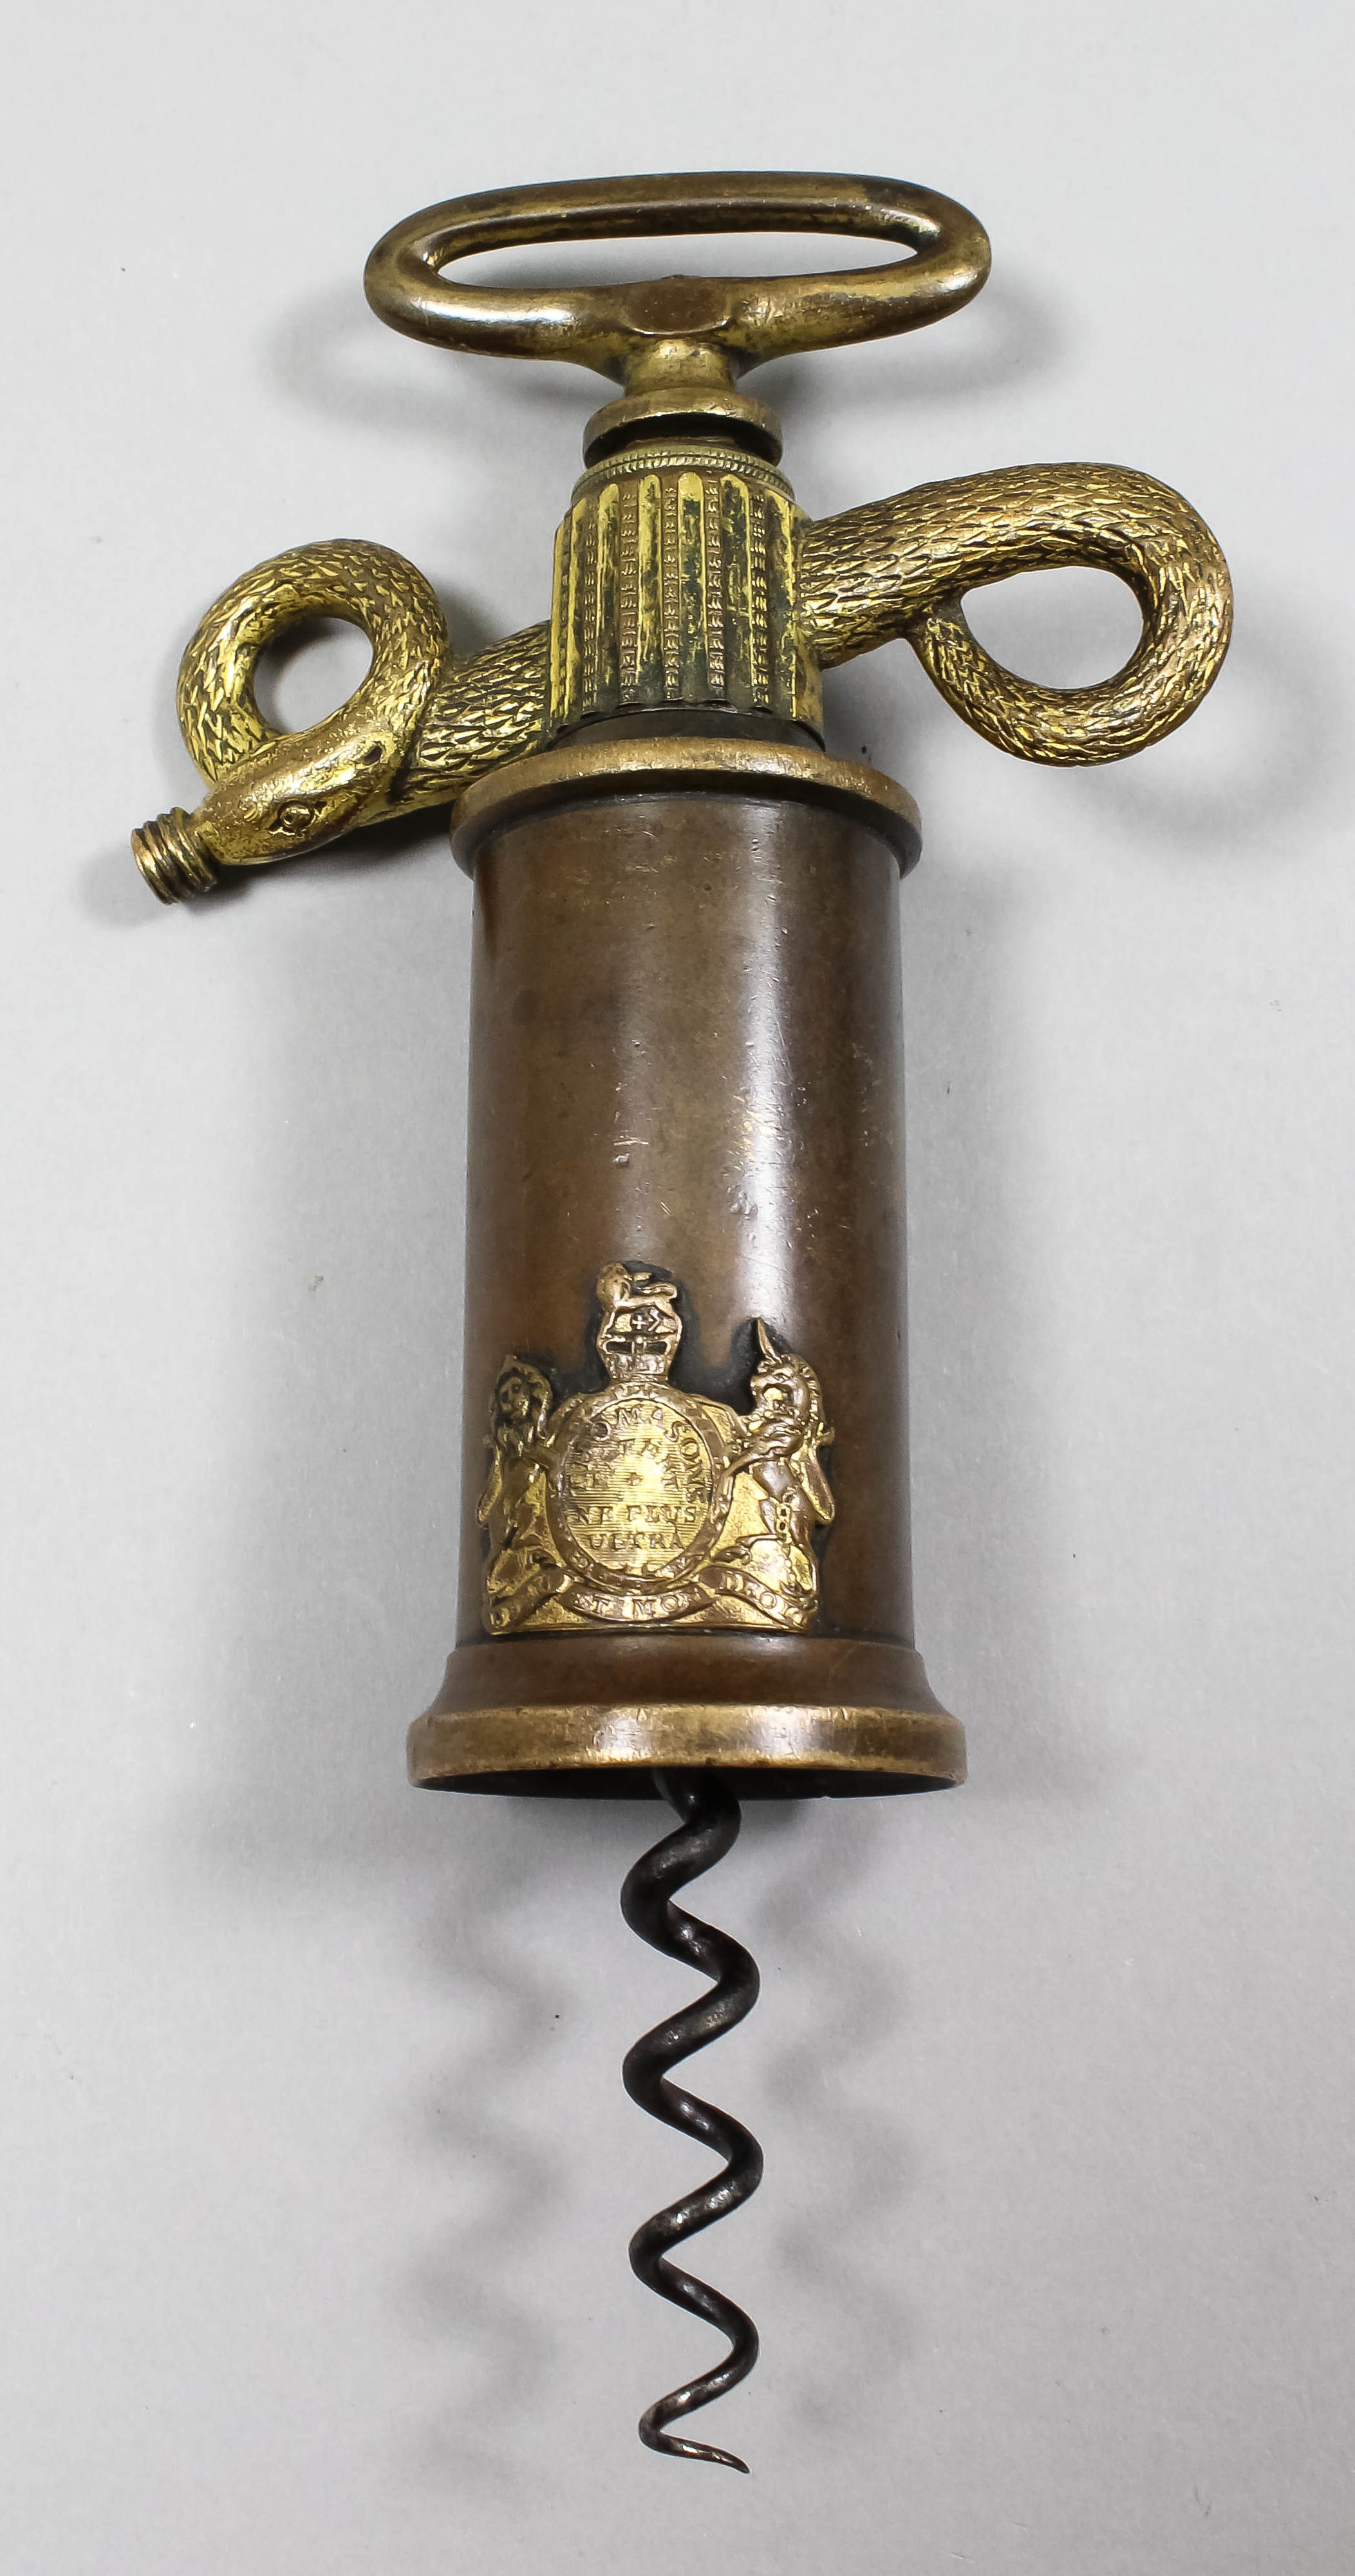 A rare Thomason variant serpent handle corkscrew, Patent No. 2617, with gilt oval top handle, and